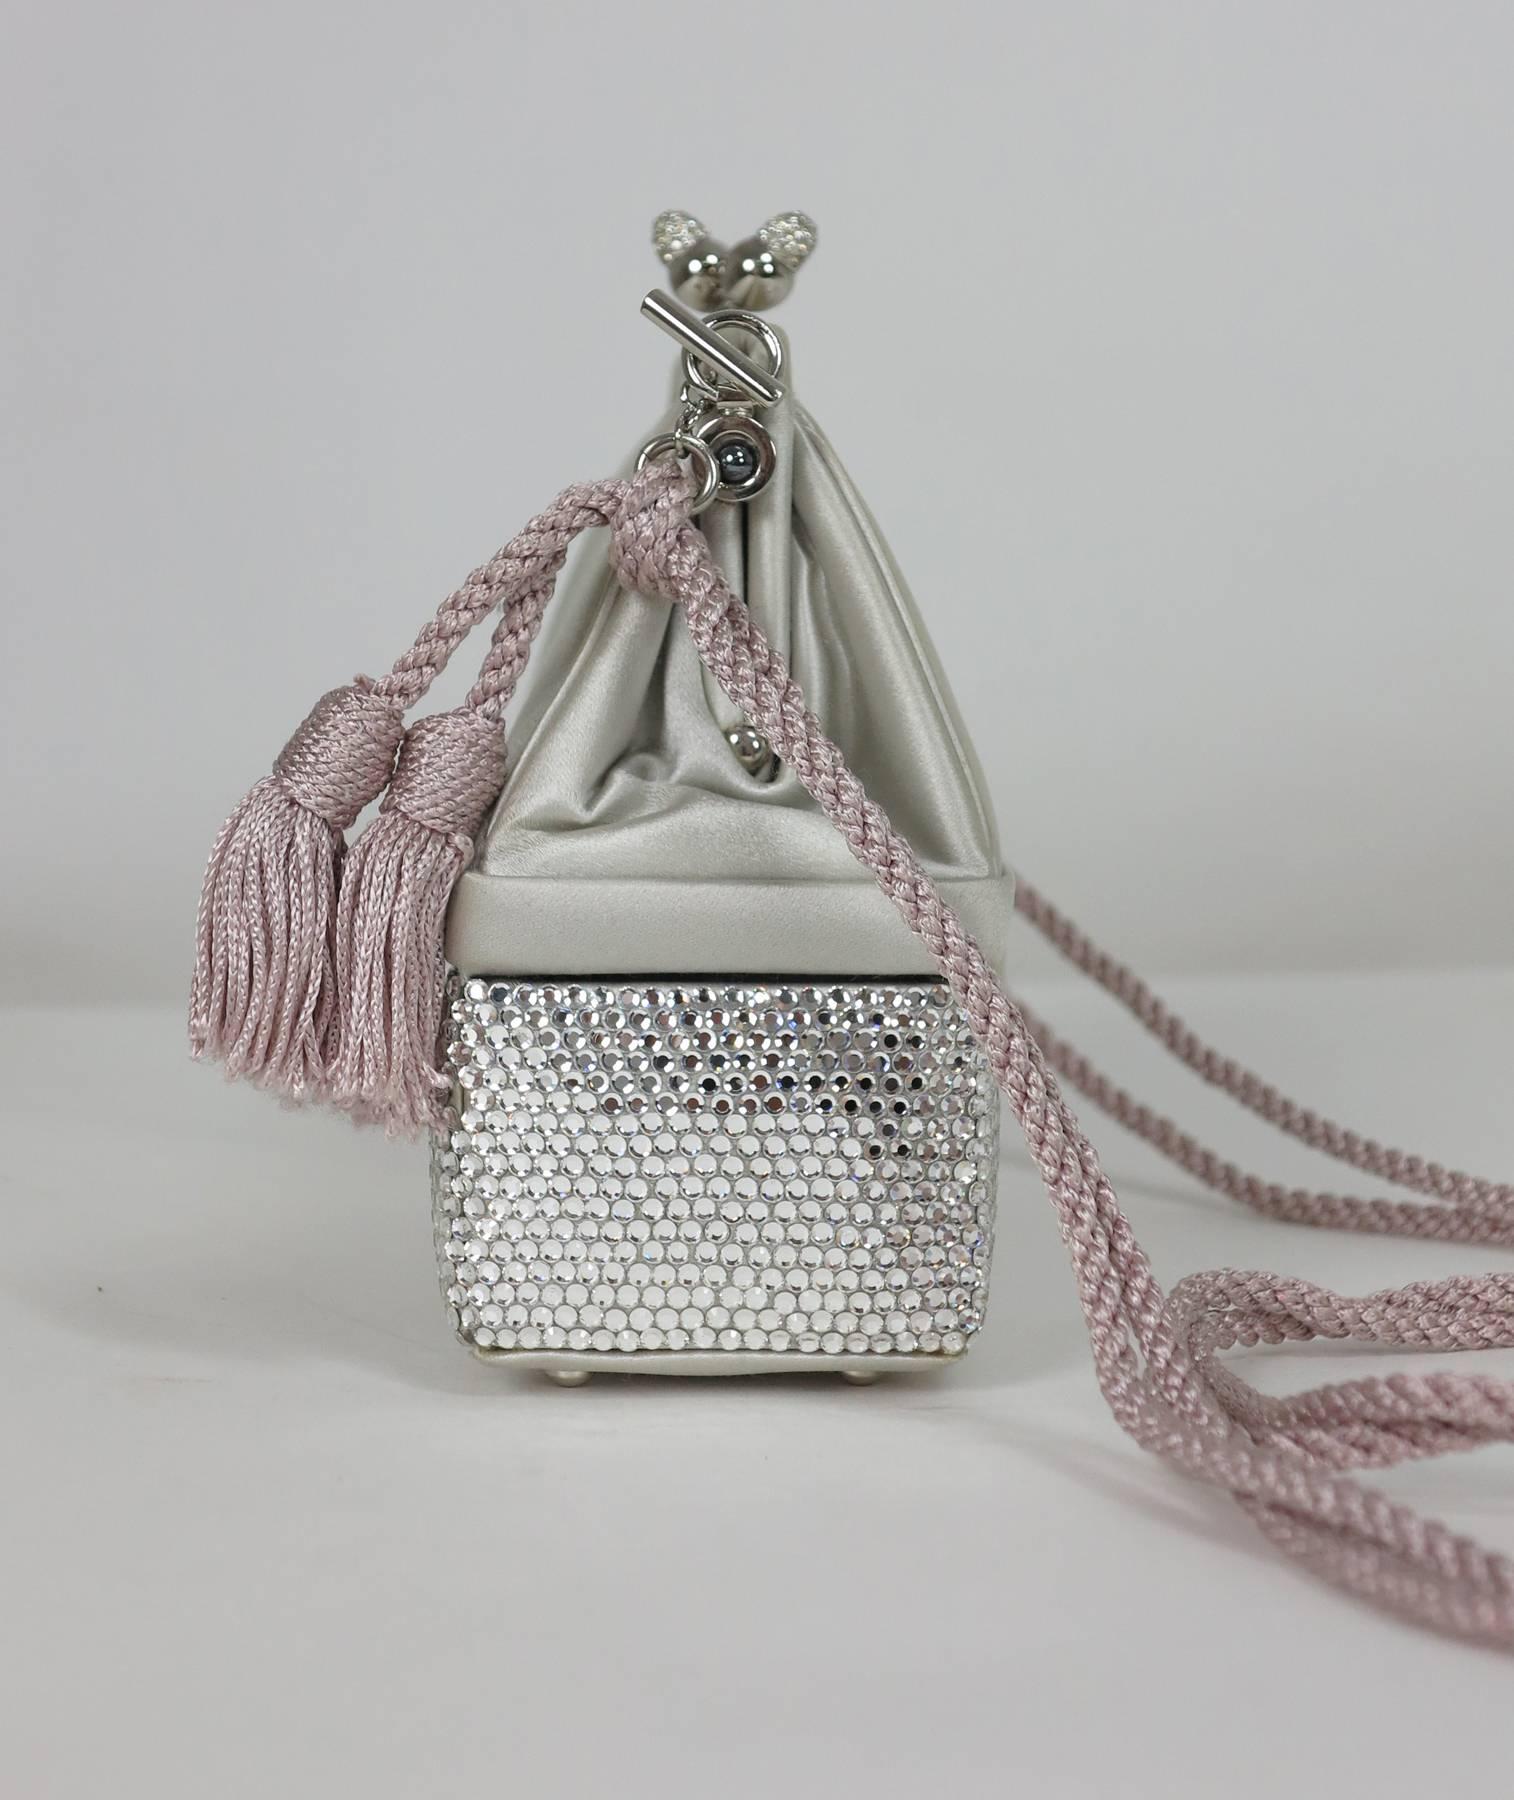 Judith Leiber silver satin & Swarovski crystal two tier minaudiere evening bag...
Silver grey satin upper frame bag with silver set with crystal rhinestones in the clasp, the lower part of the bag is covered with Swarovski crystals, opens at the